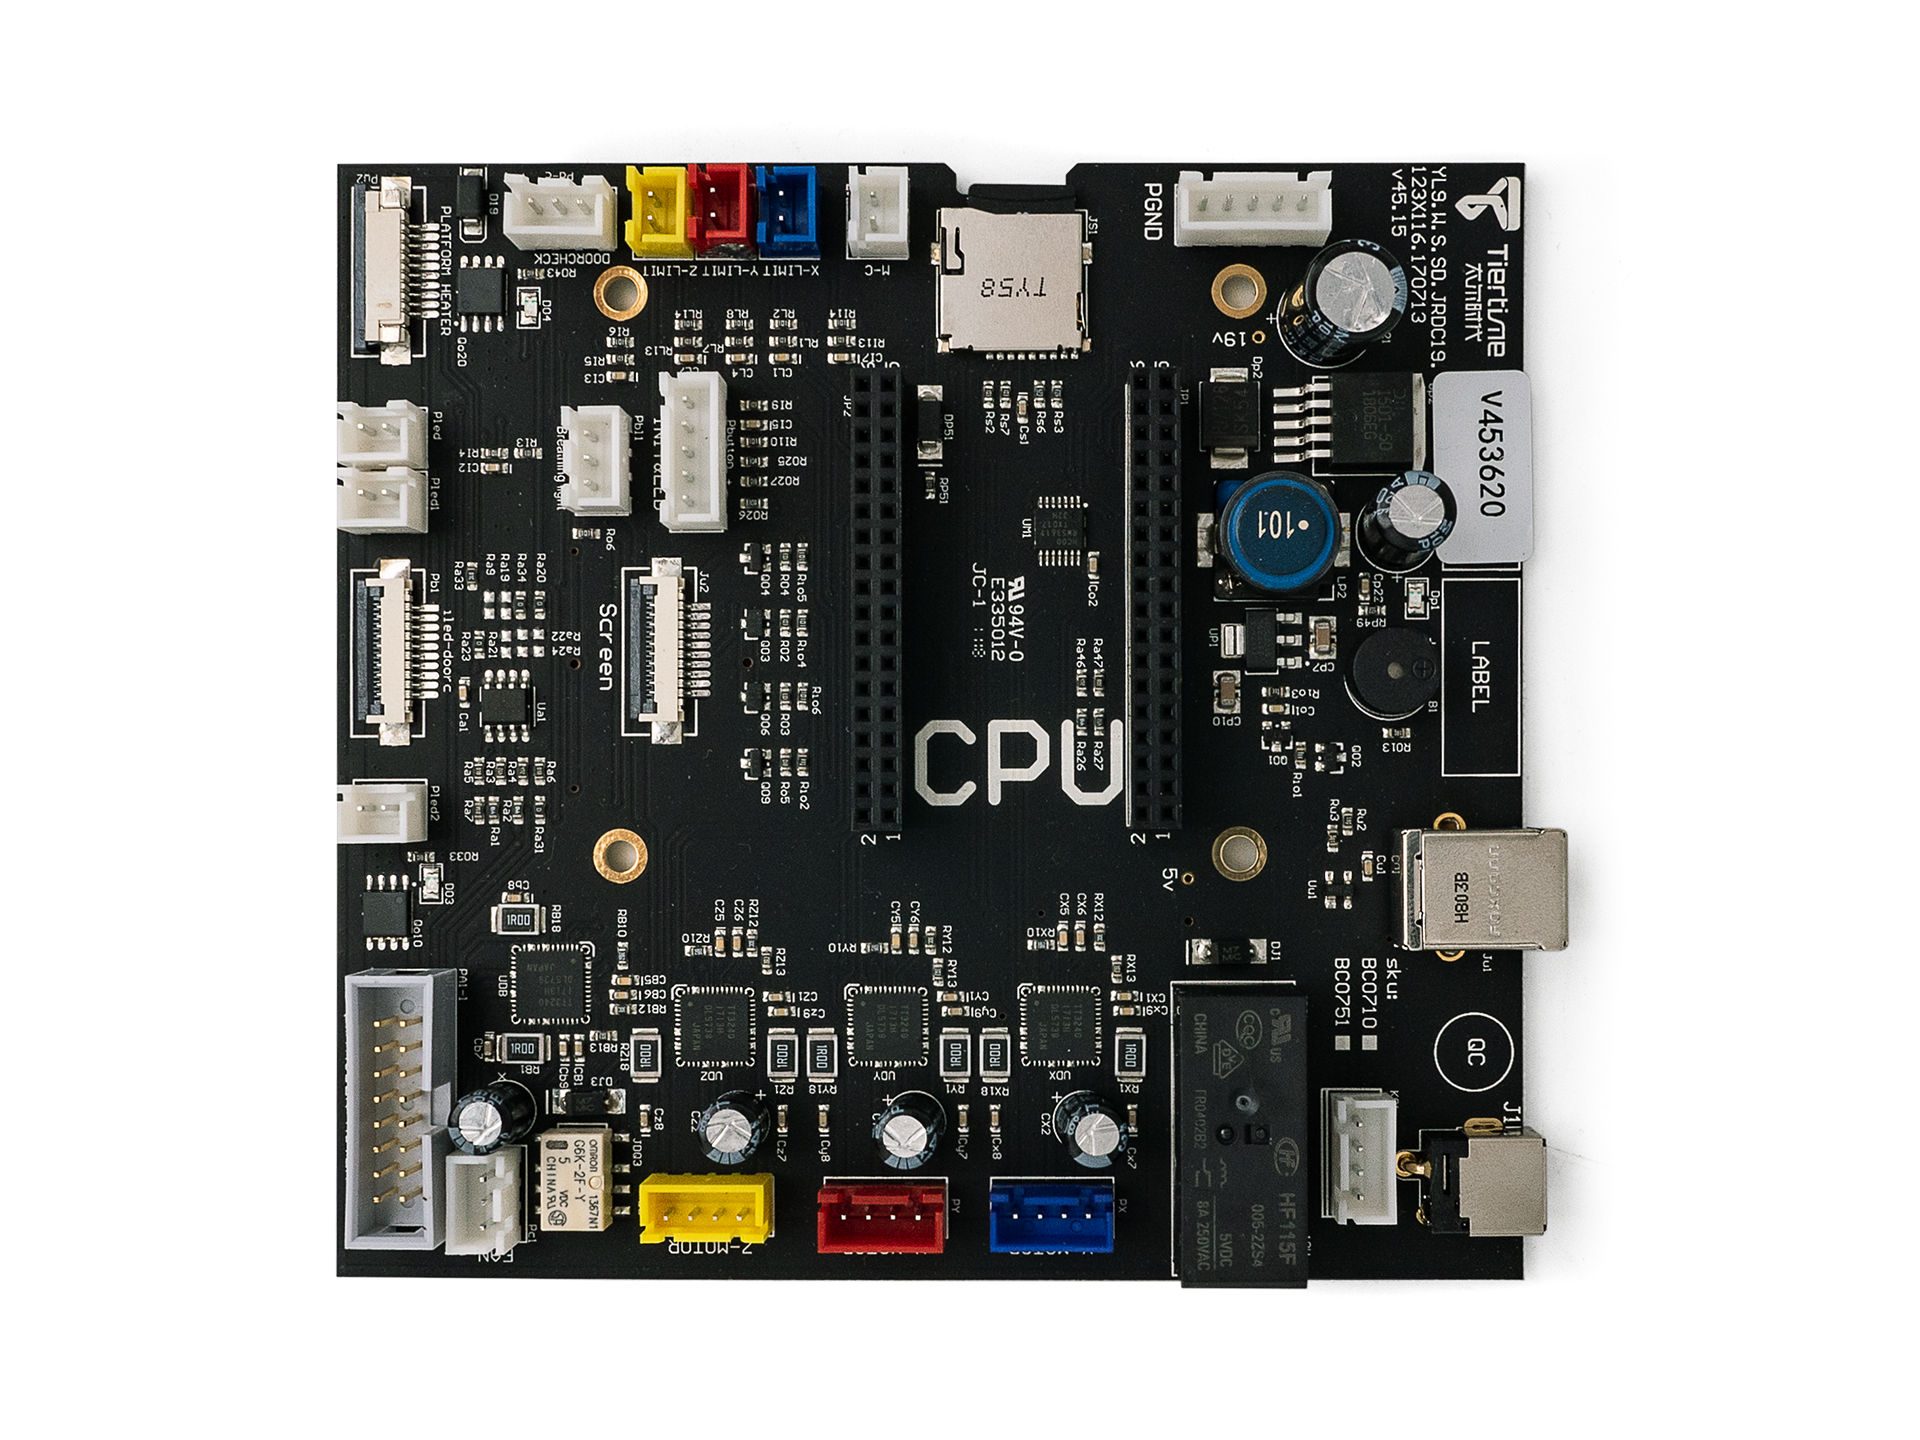 Mainboard for Cetus MK3 / UP mini 2 